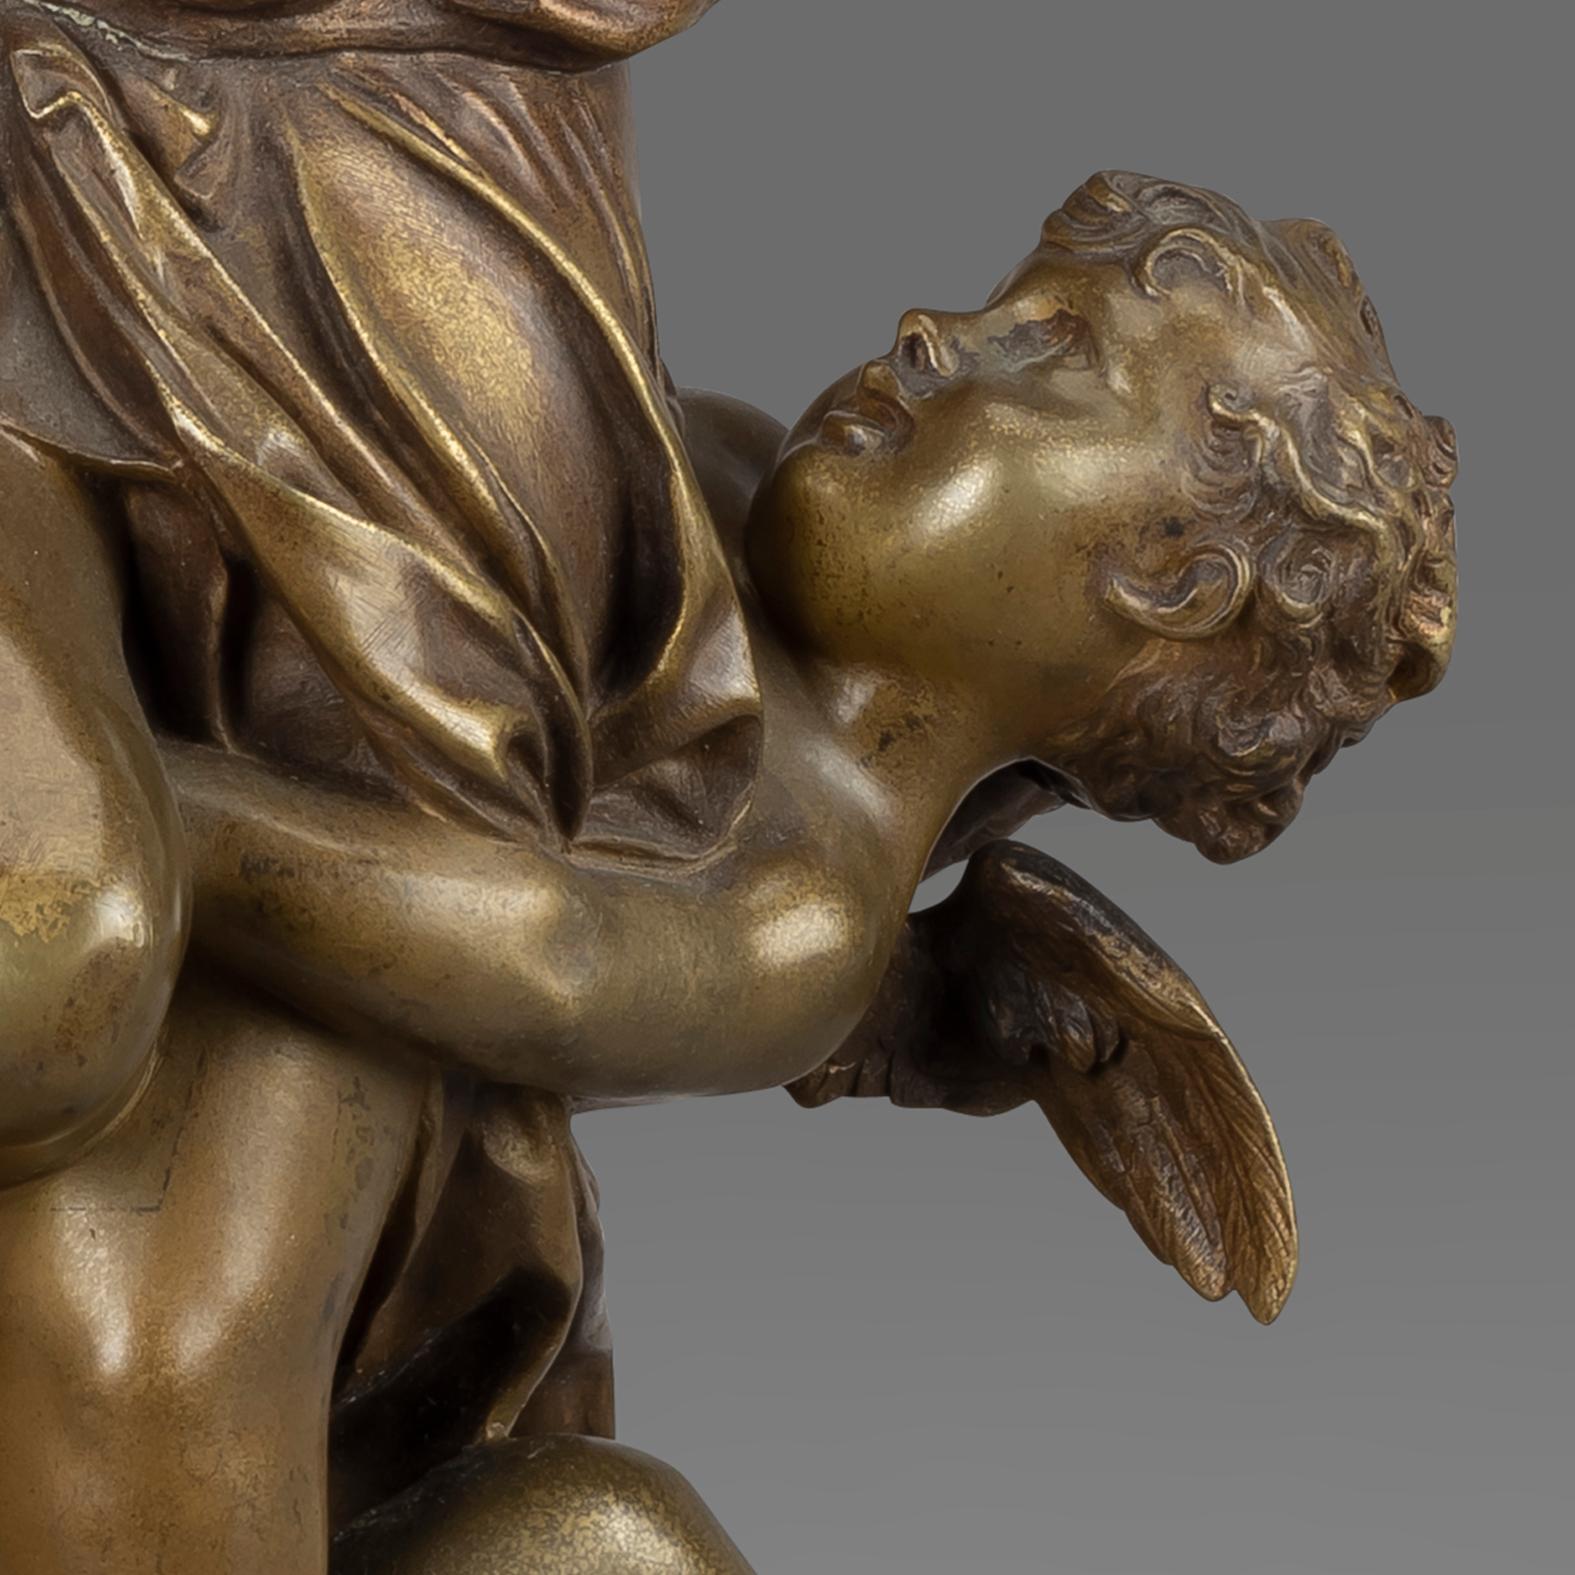 French 'L'innocence Tourmentée Par L'amour' A Figural Group by Luca Madrassi circa 1900 For Sale